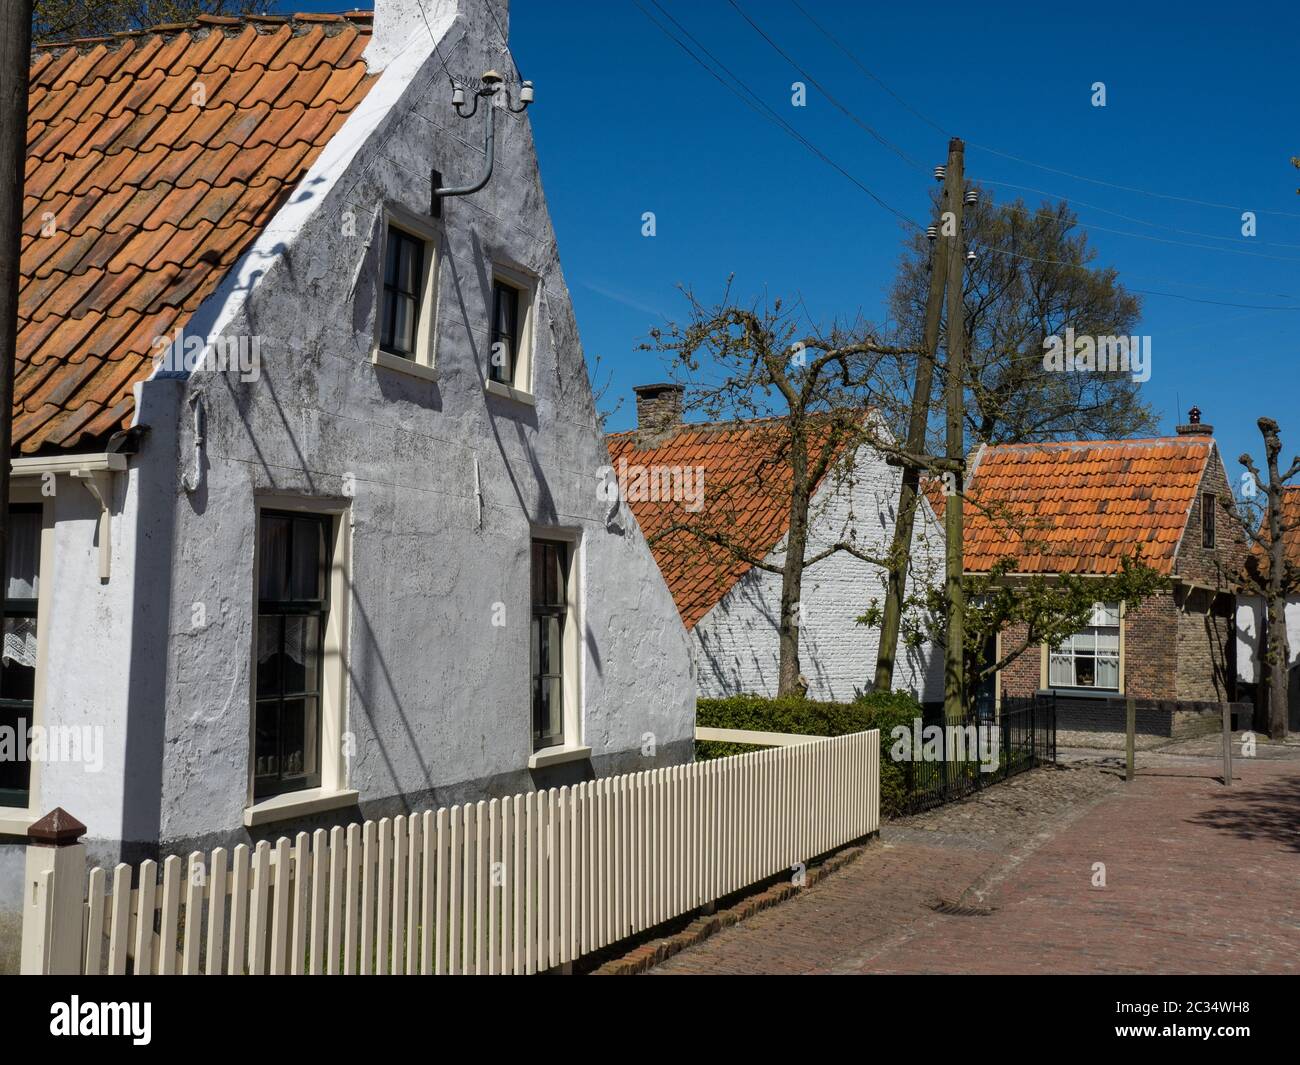 in the netherlands Stock Photo